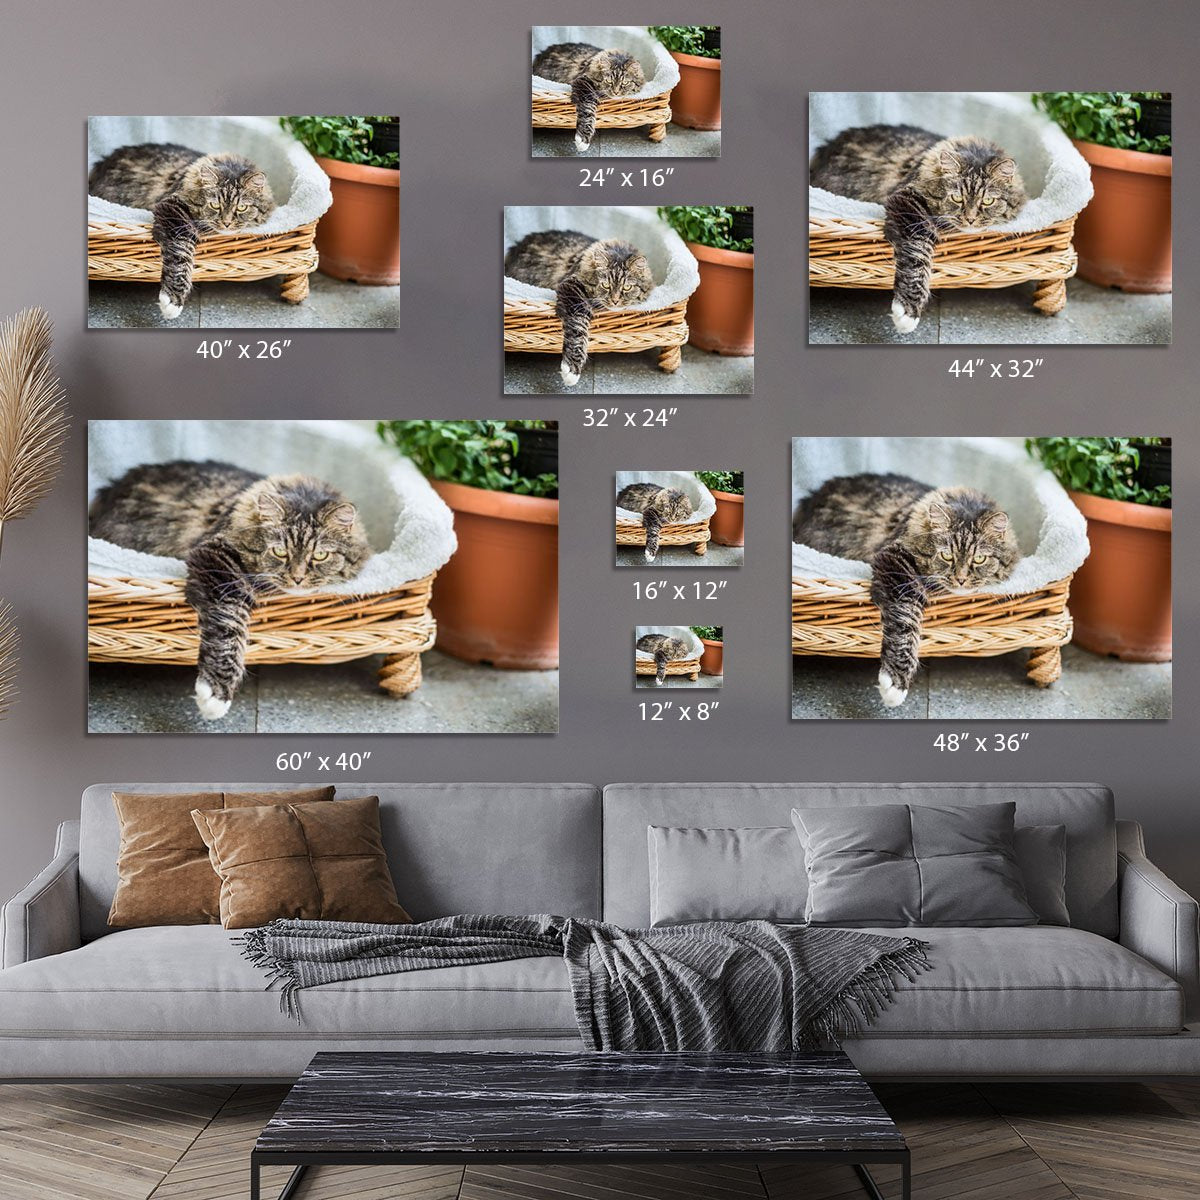 Big fluffy cat lying in wicker chaise sofa couch on balcony or garden terrace with flowers pot Canvas Print or Poster